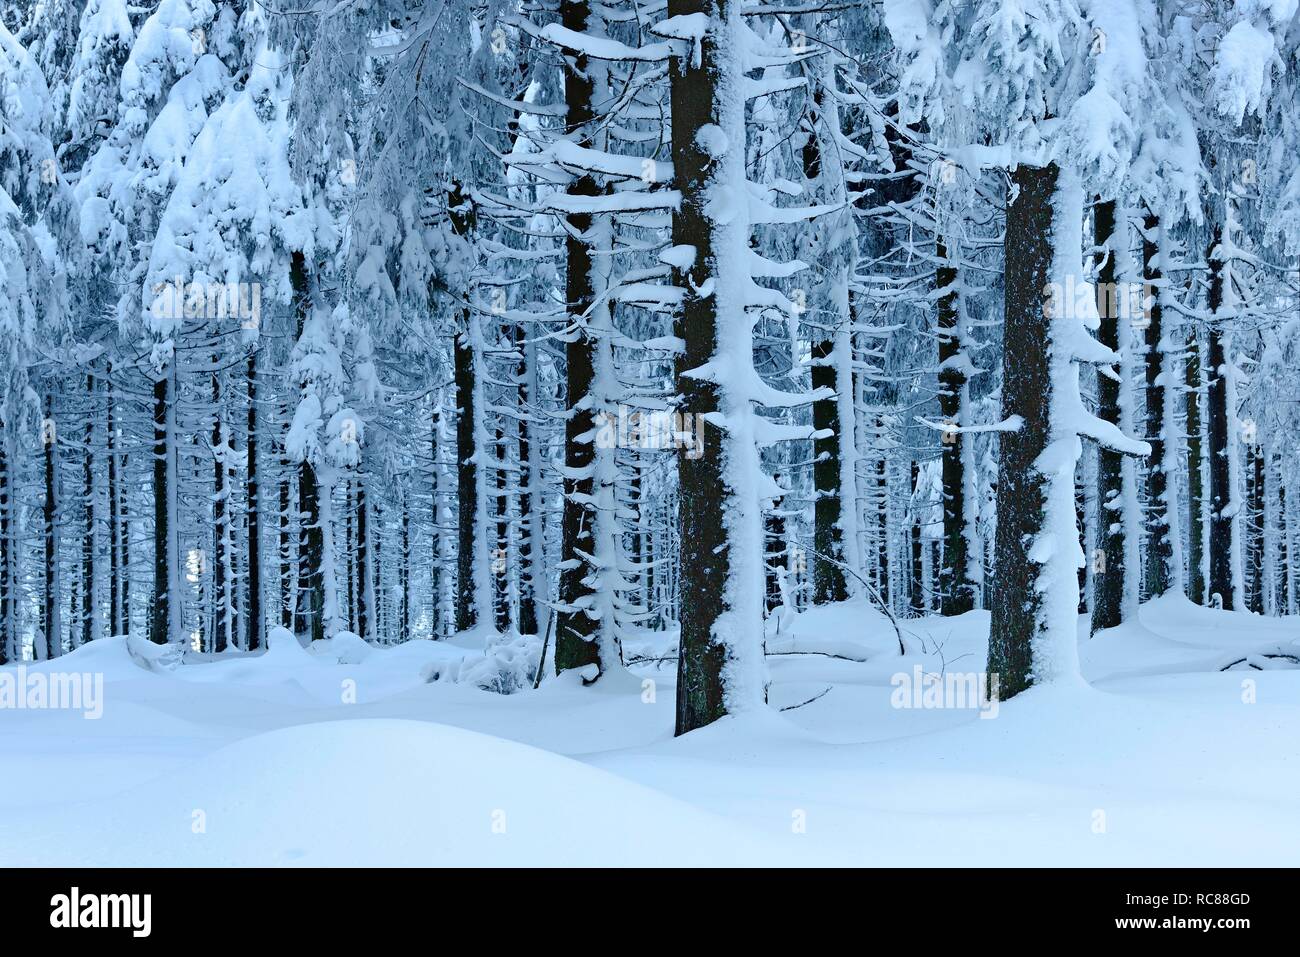 Snow-covered forest in winter, spruces under heavy snow load, Harz National Park, Lower Saxony, Germany Stock Photo